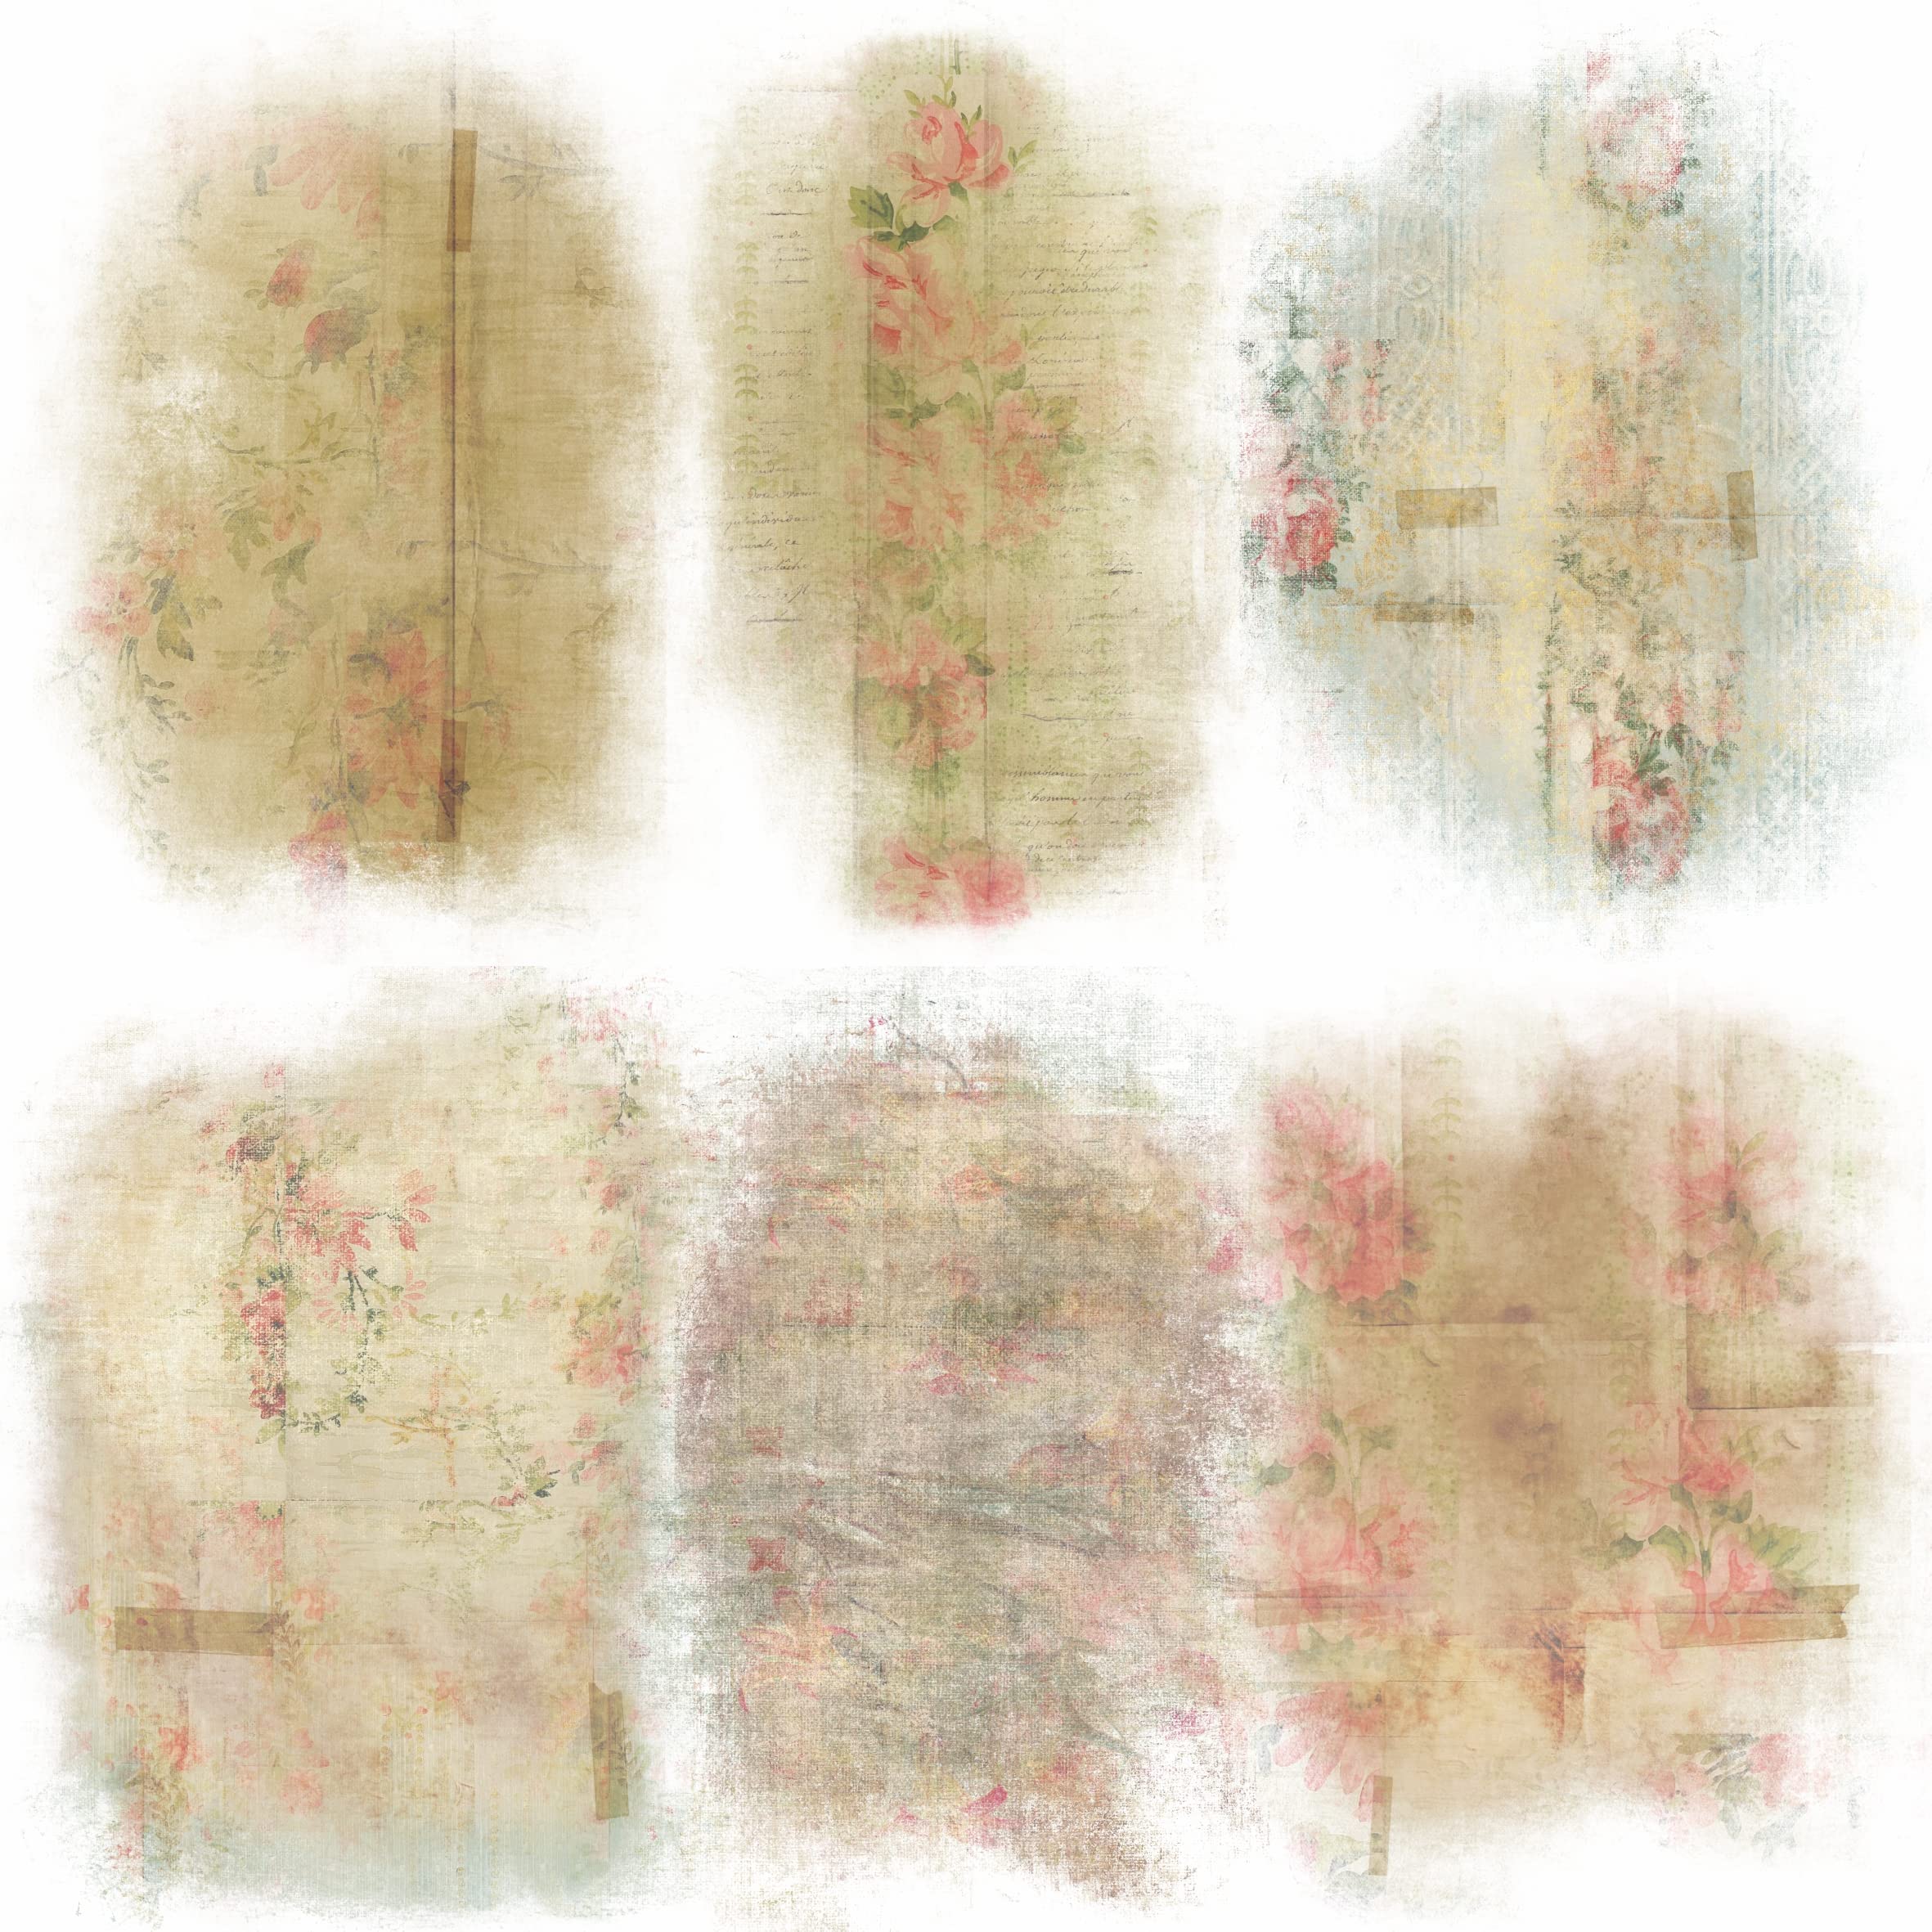 Flower Overlay Rice Paper, 8 x 10.5 inch - 6 x Different Printed Mulberry  Paper Images 30gsm Visible Fibres for Decoupage Crafts Mixed Media Collage